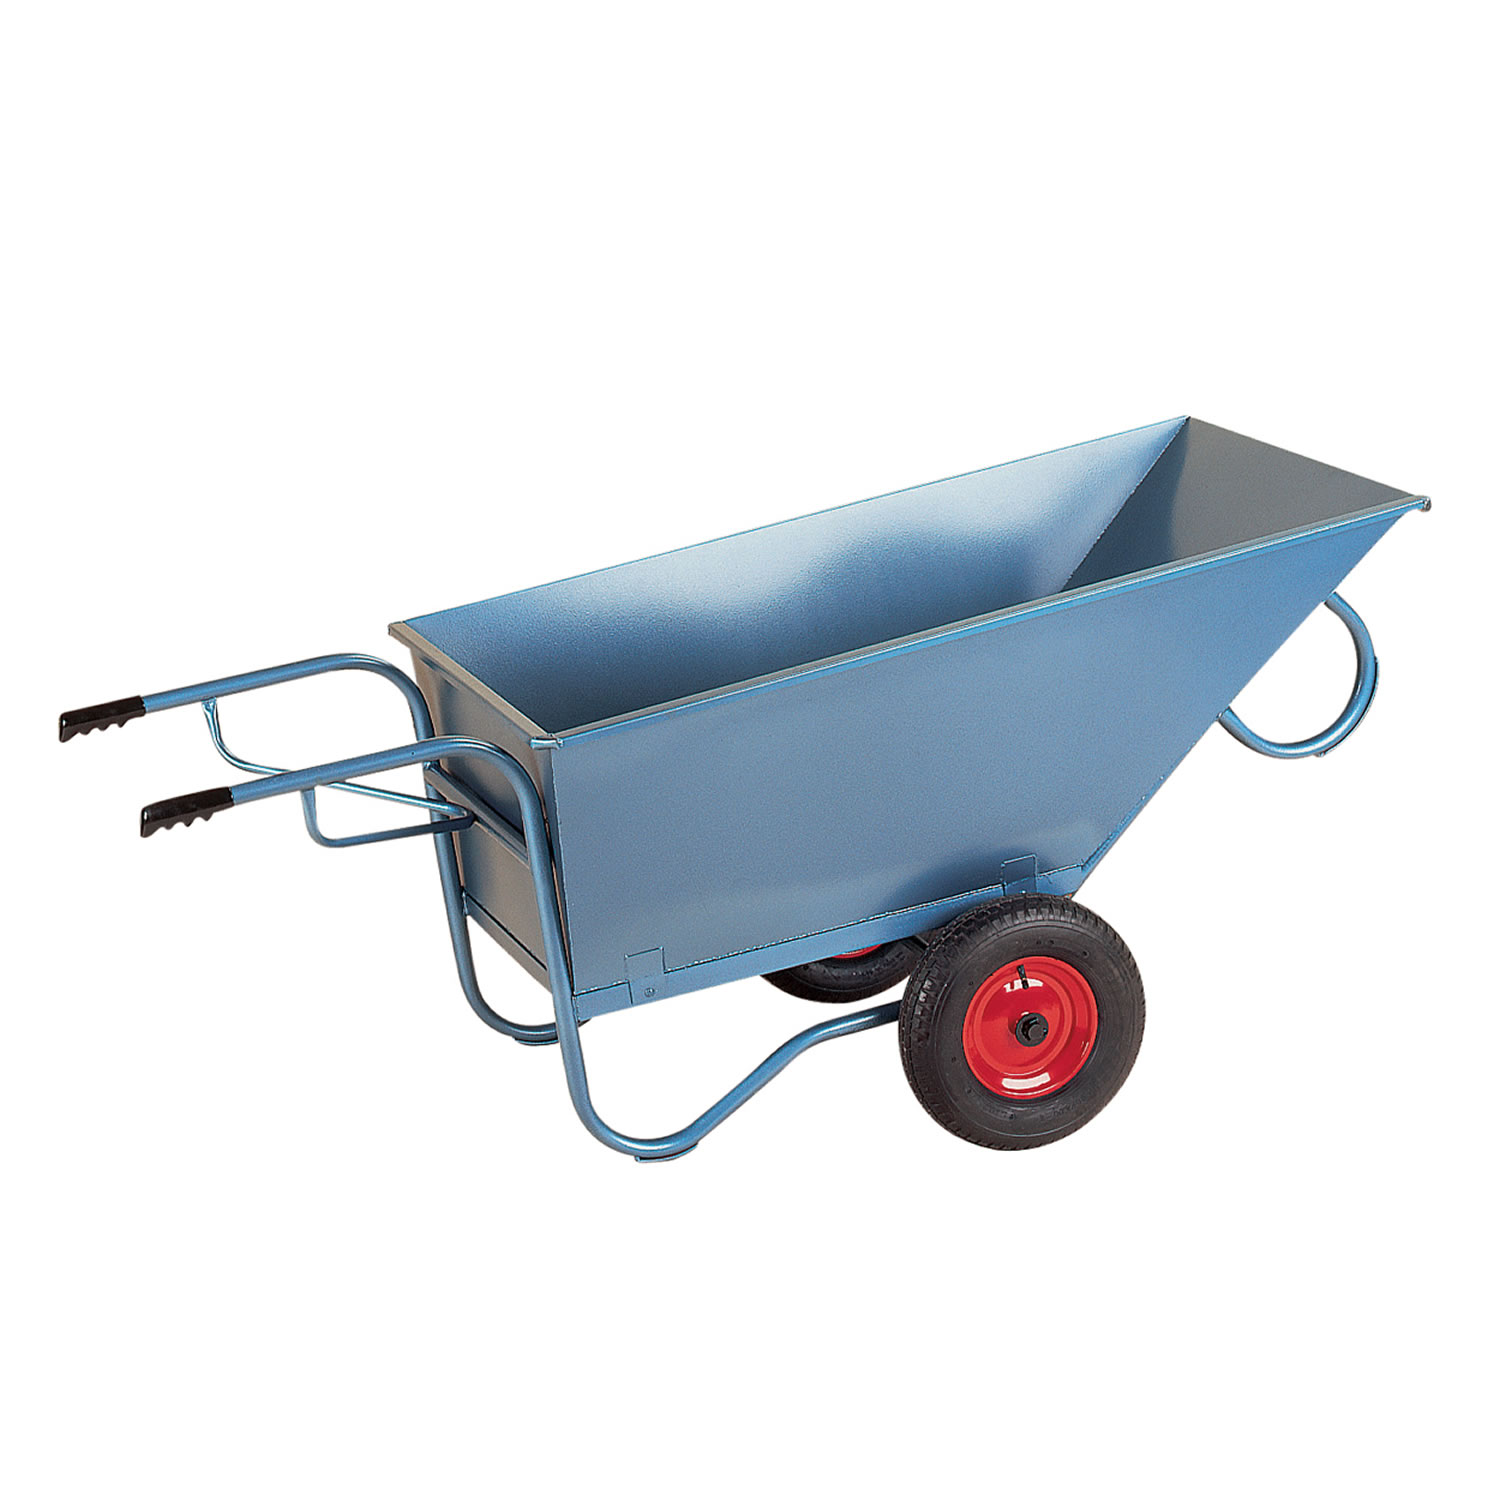 STUBBS STABLE BARROW LARGE S106AS  LARGE